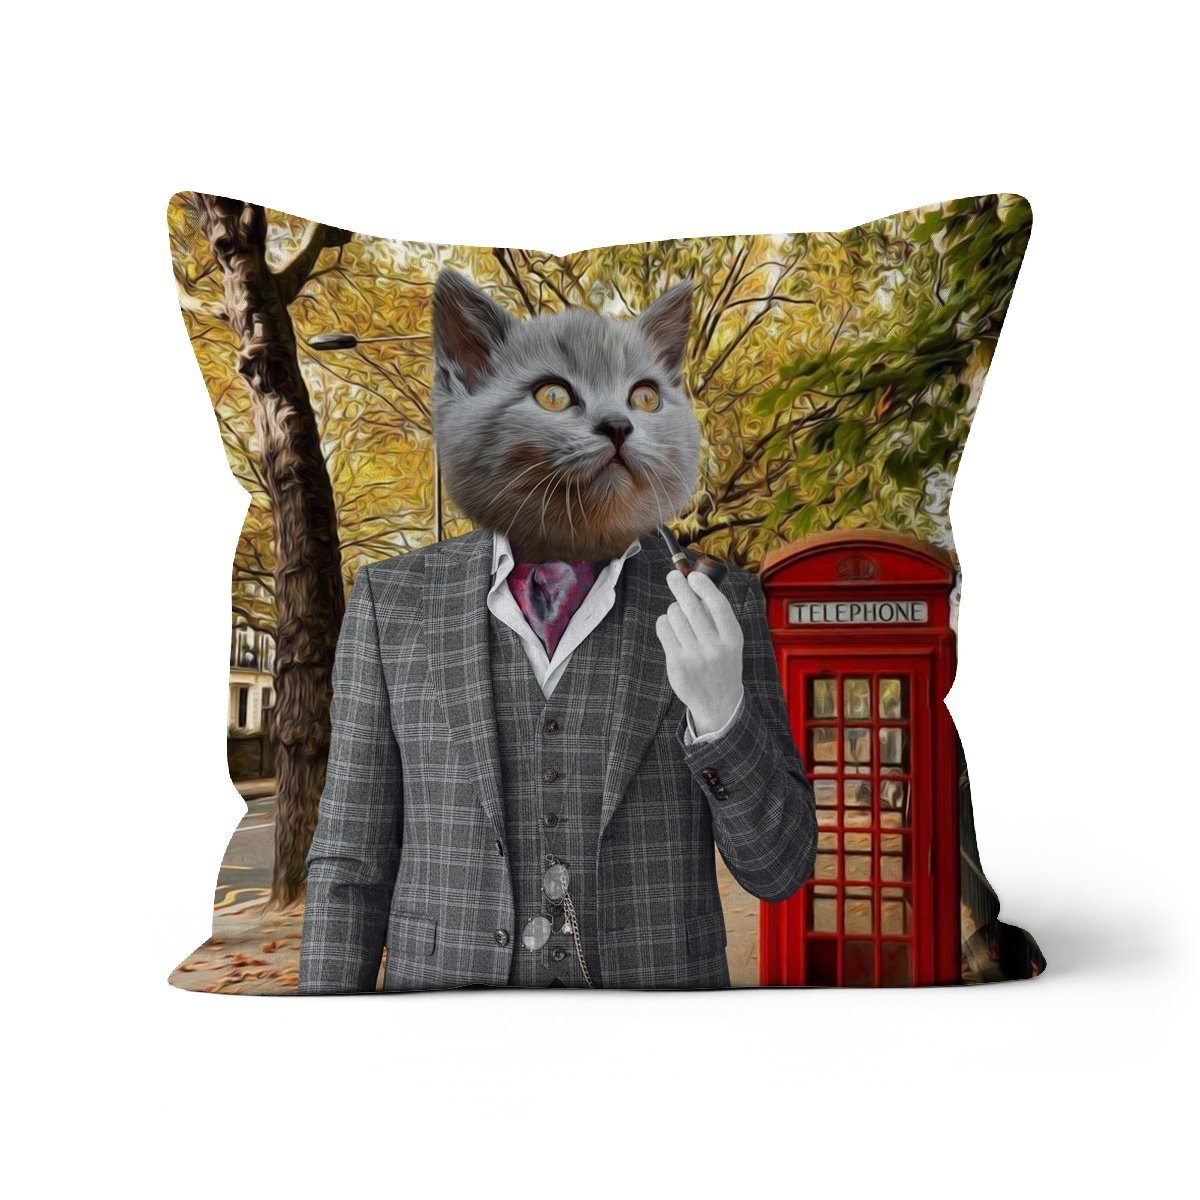 The English Gent: Custom Pet Cushion - Paw & Glory - #pet portraits# - #dog portraits# - #pet portraits uk#paw & glory, custom pet portrait pillow,pet face pillows, personalised pet pillows, pillows with dogs picture, custom pet pillows, pet print pillow